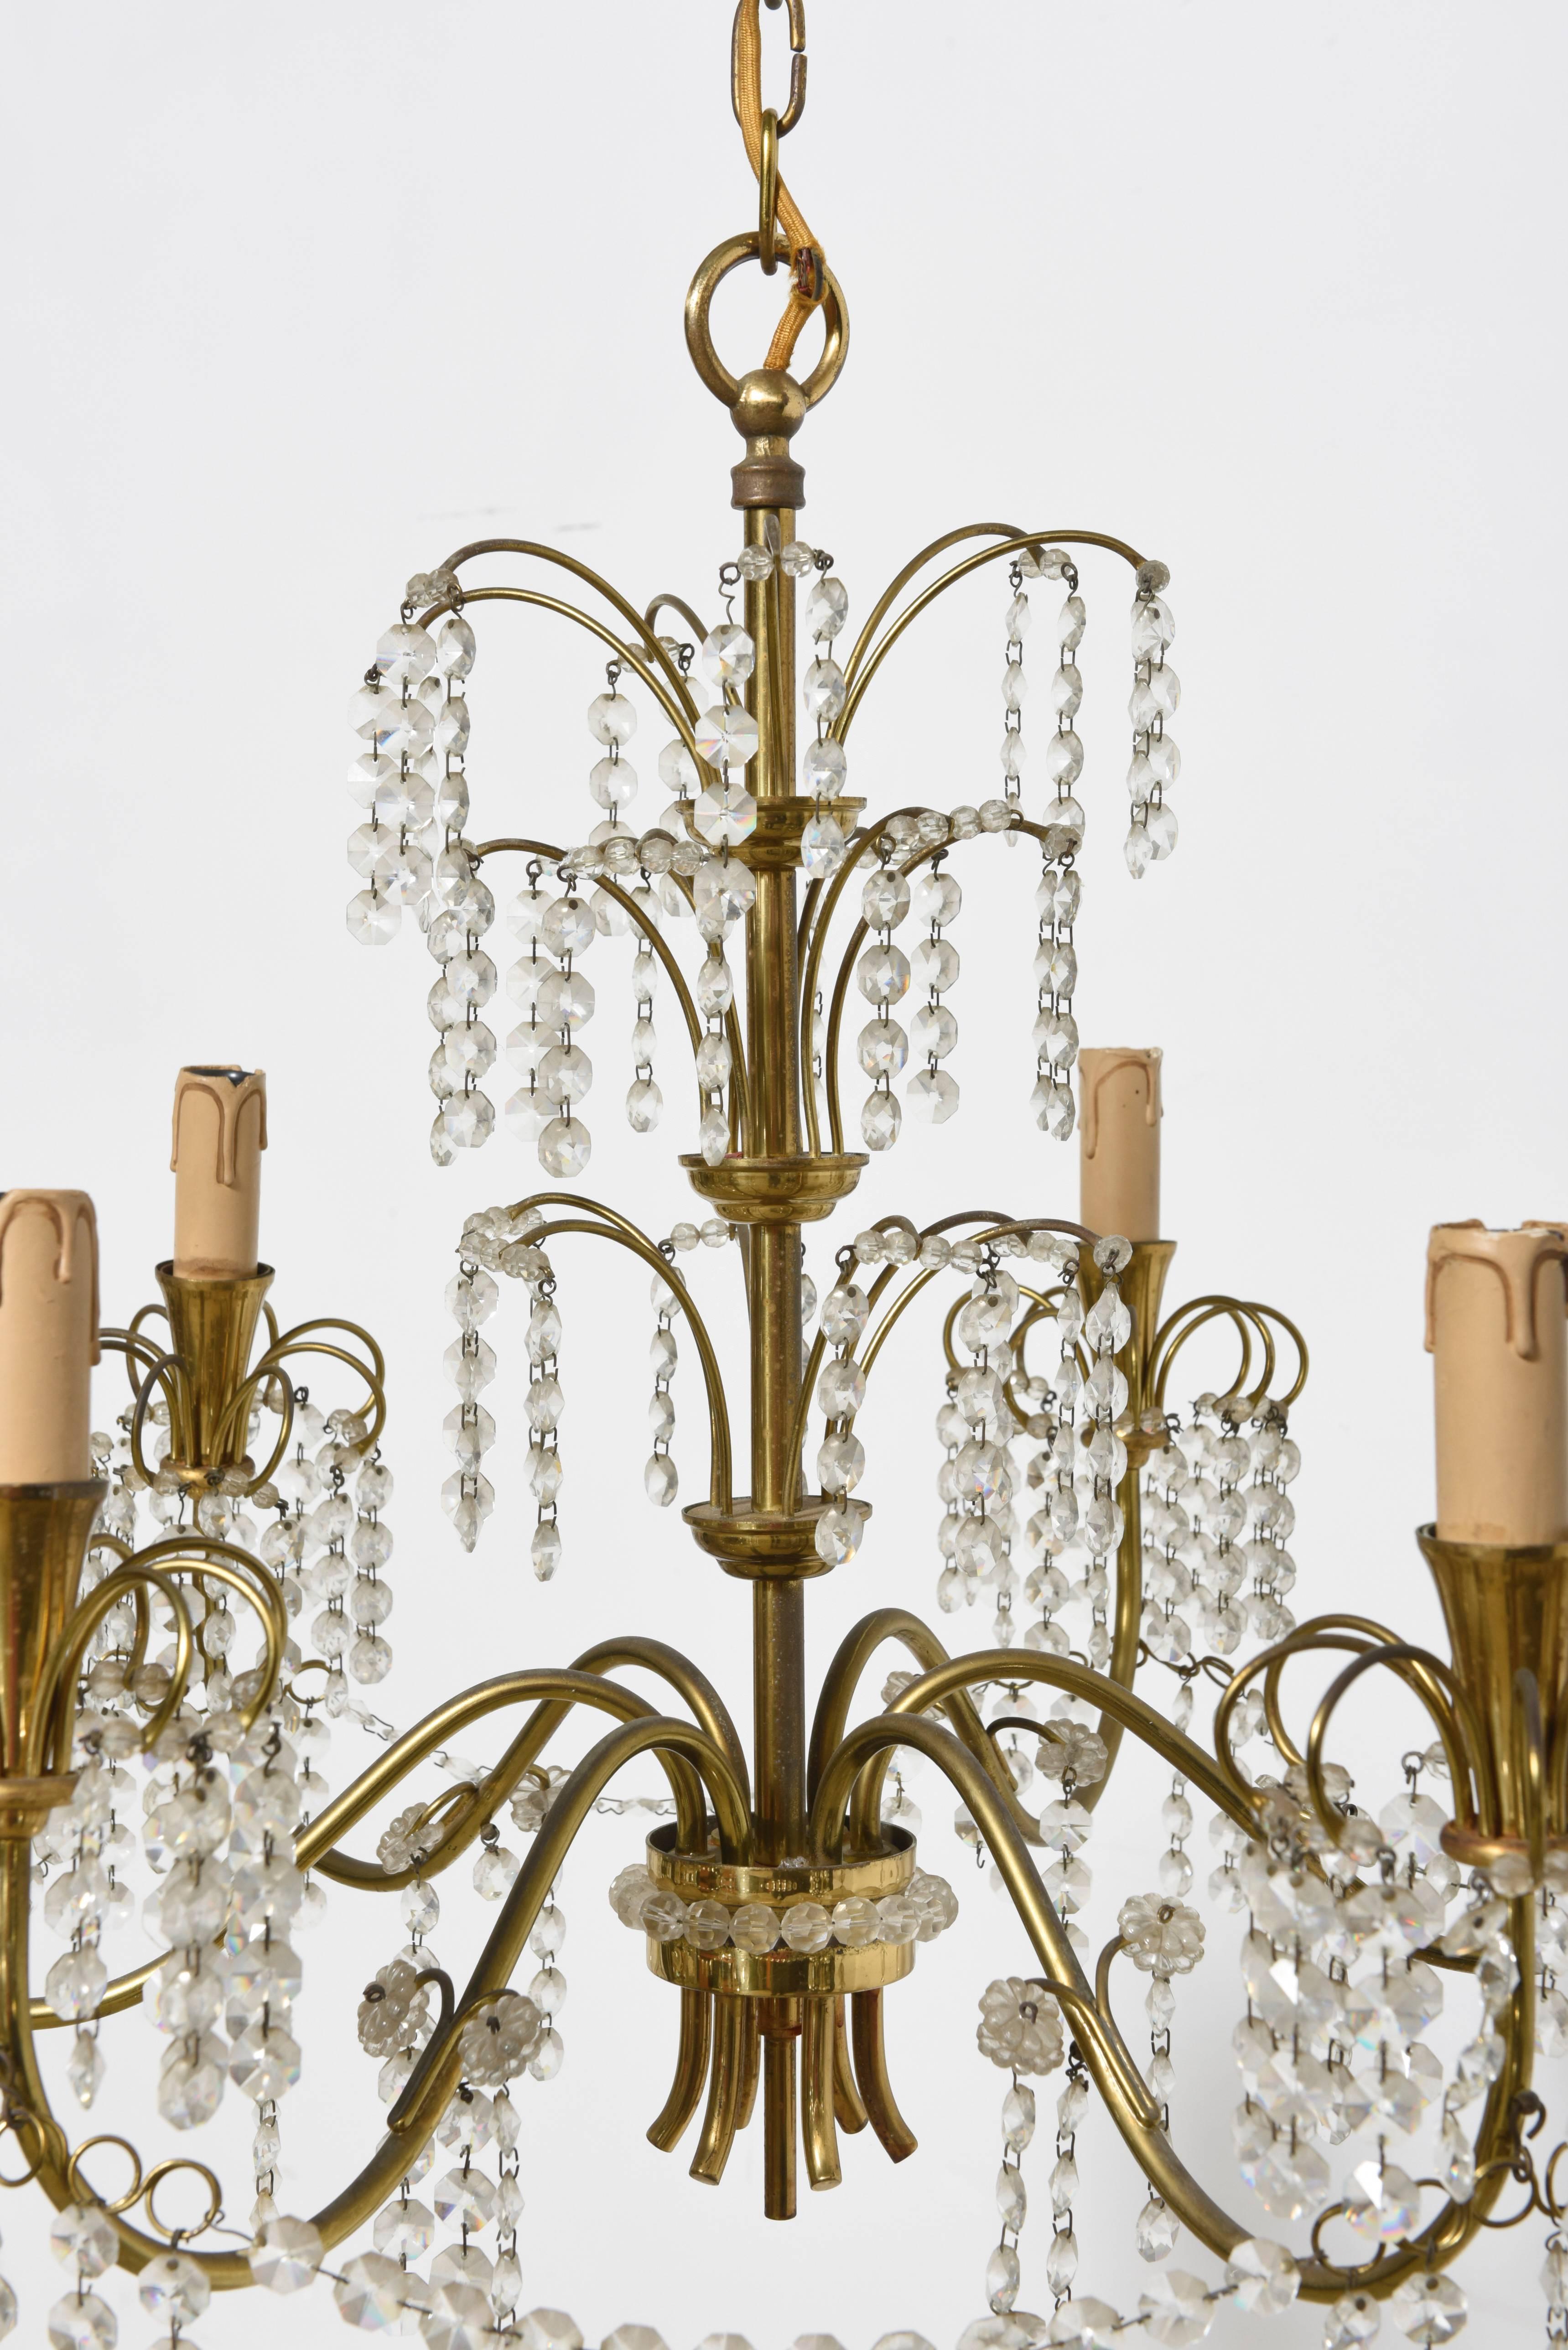 Faceted Romantic Italian Brass, Crystal, 1950s Waterfall Chandelier For Sale